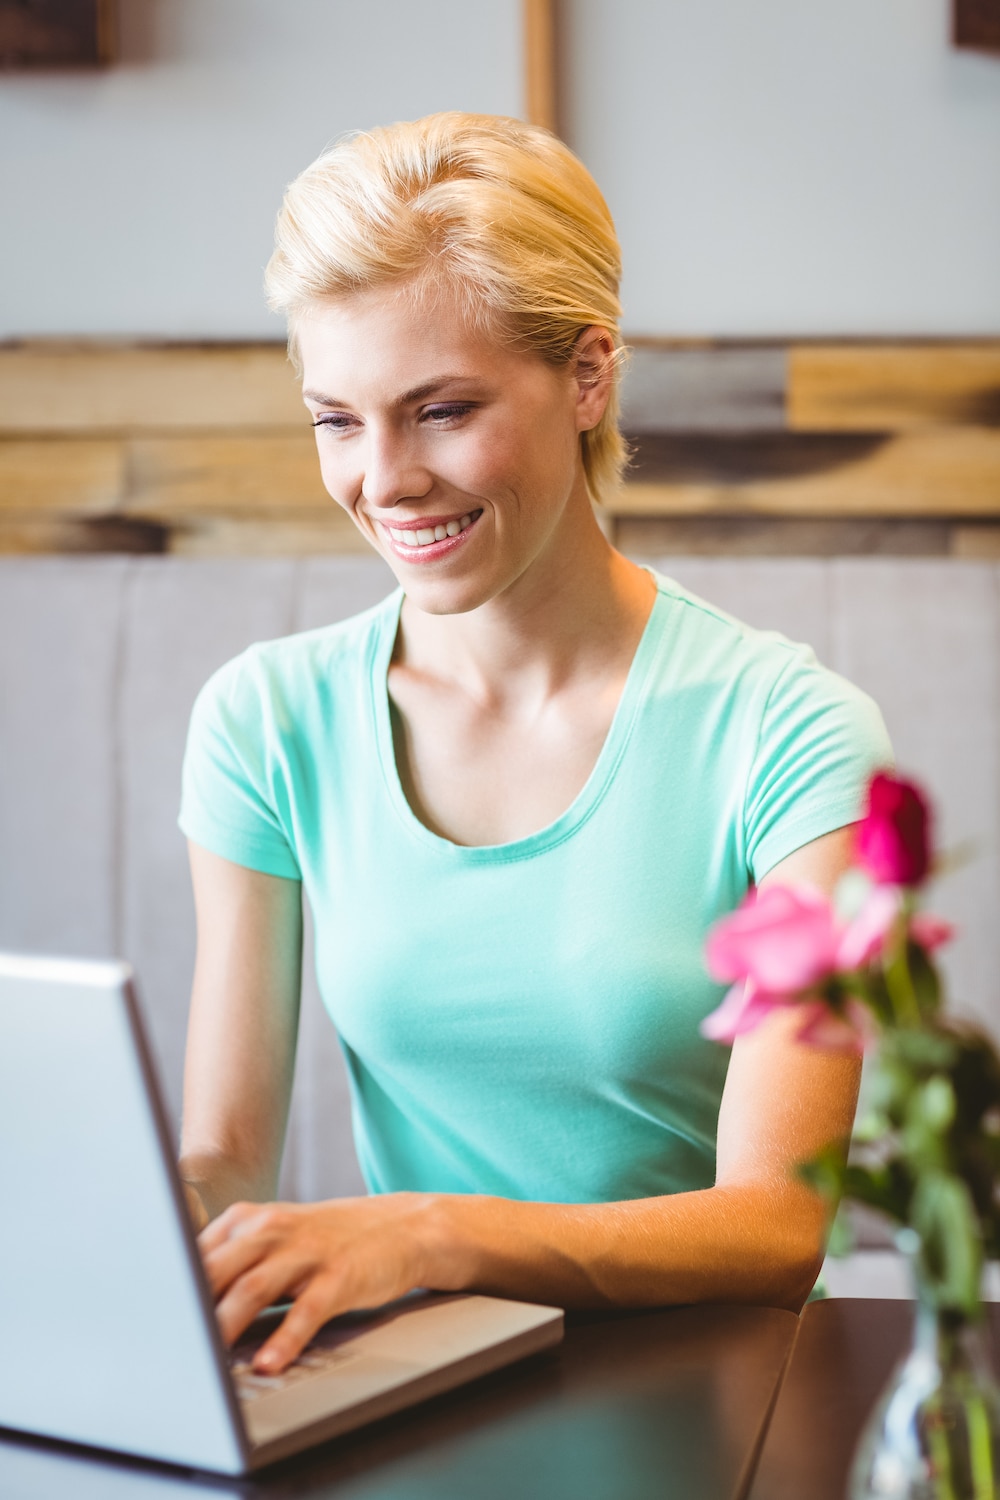 Blonde haired woman working on laptop in green shirt